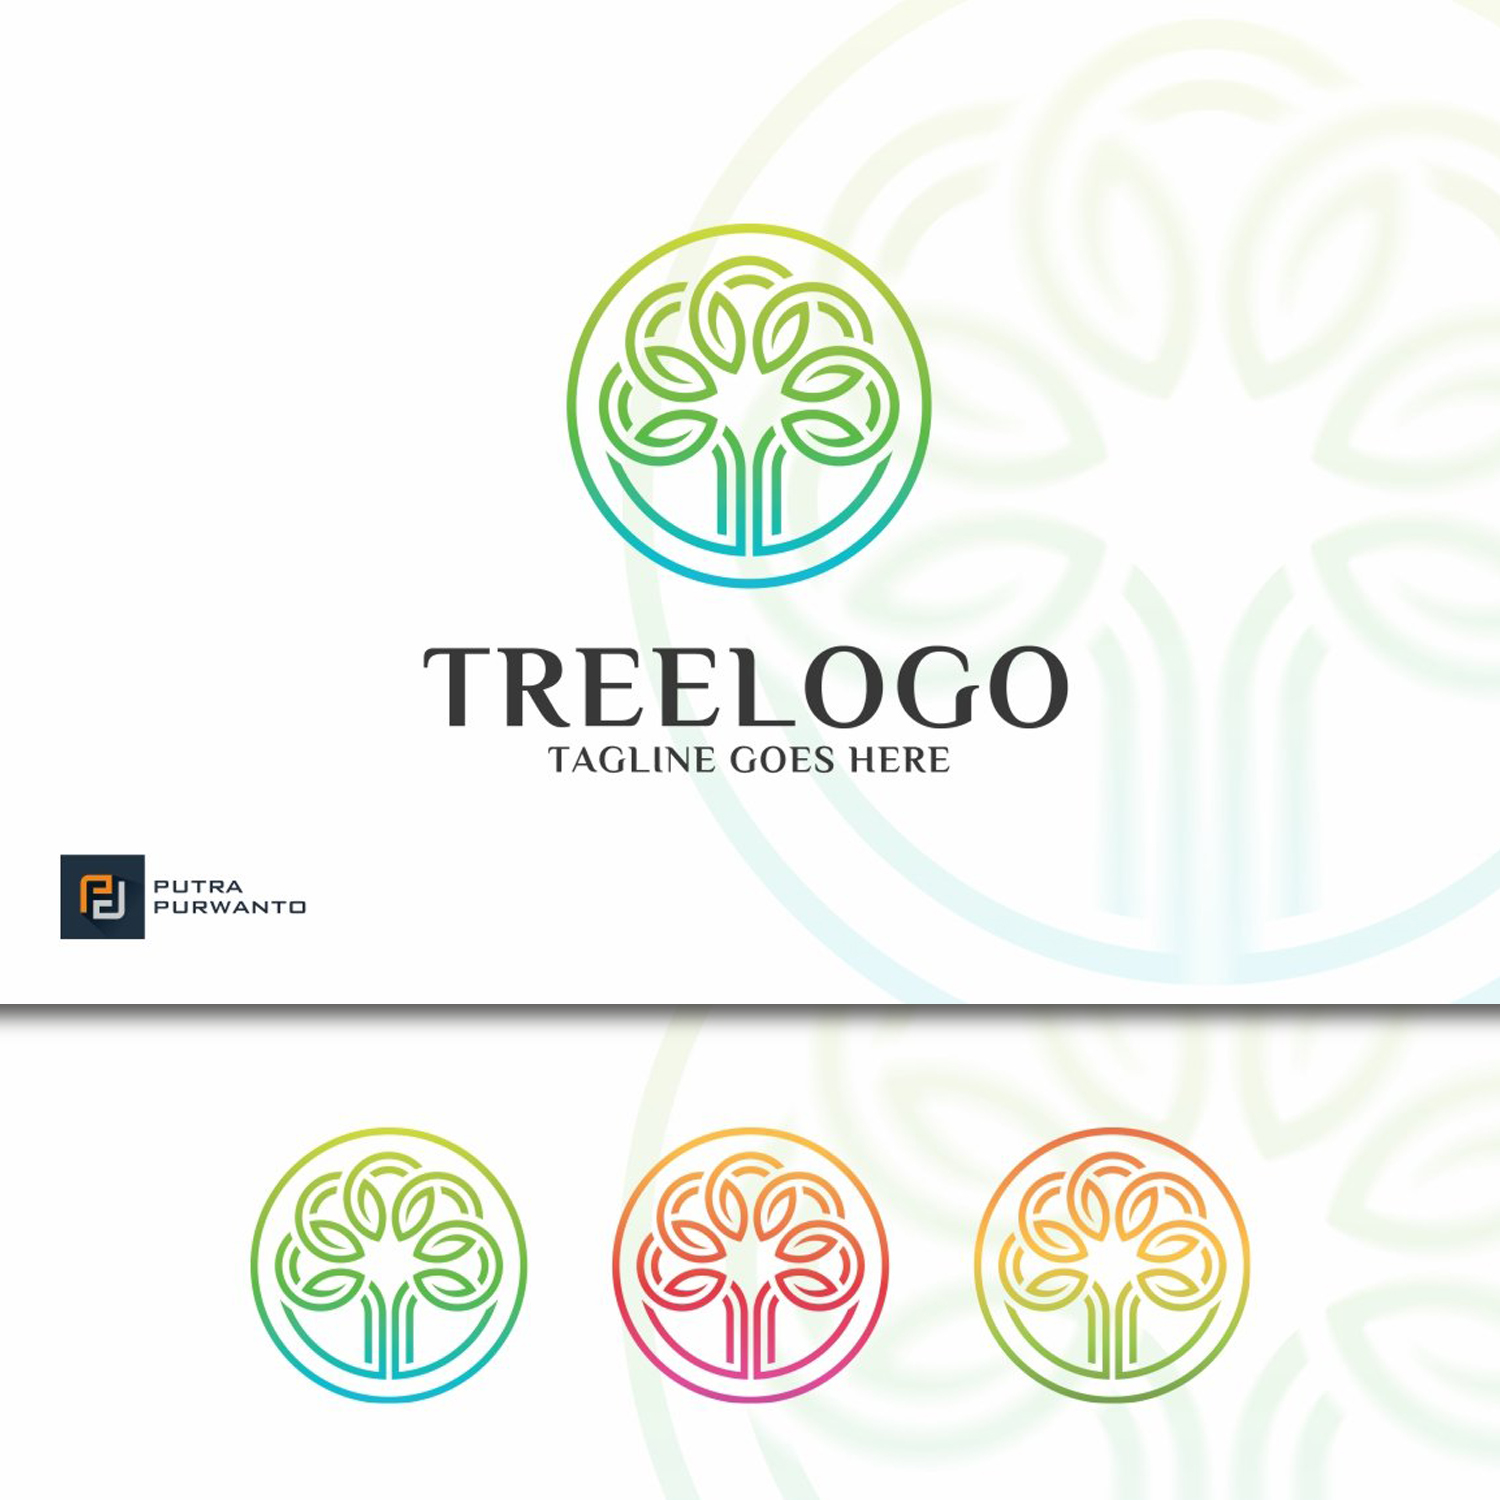 A color image of a treelogo with an inscription in black.